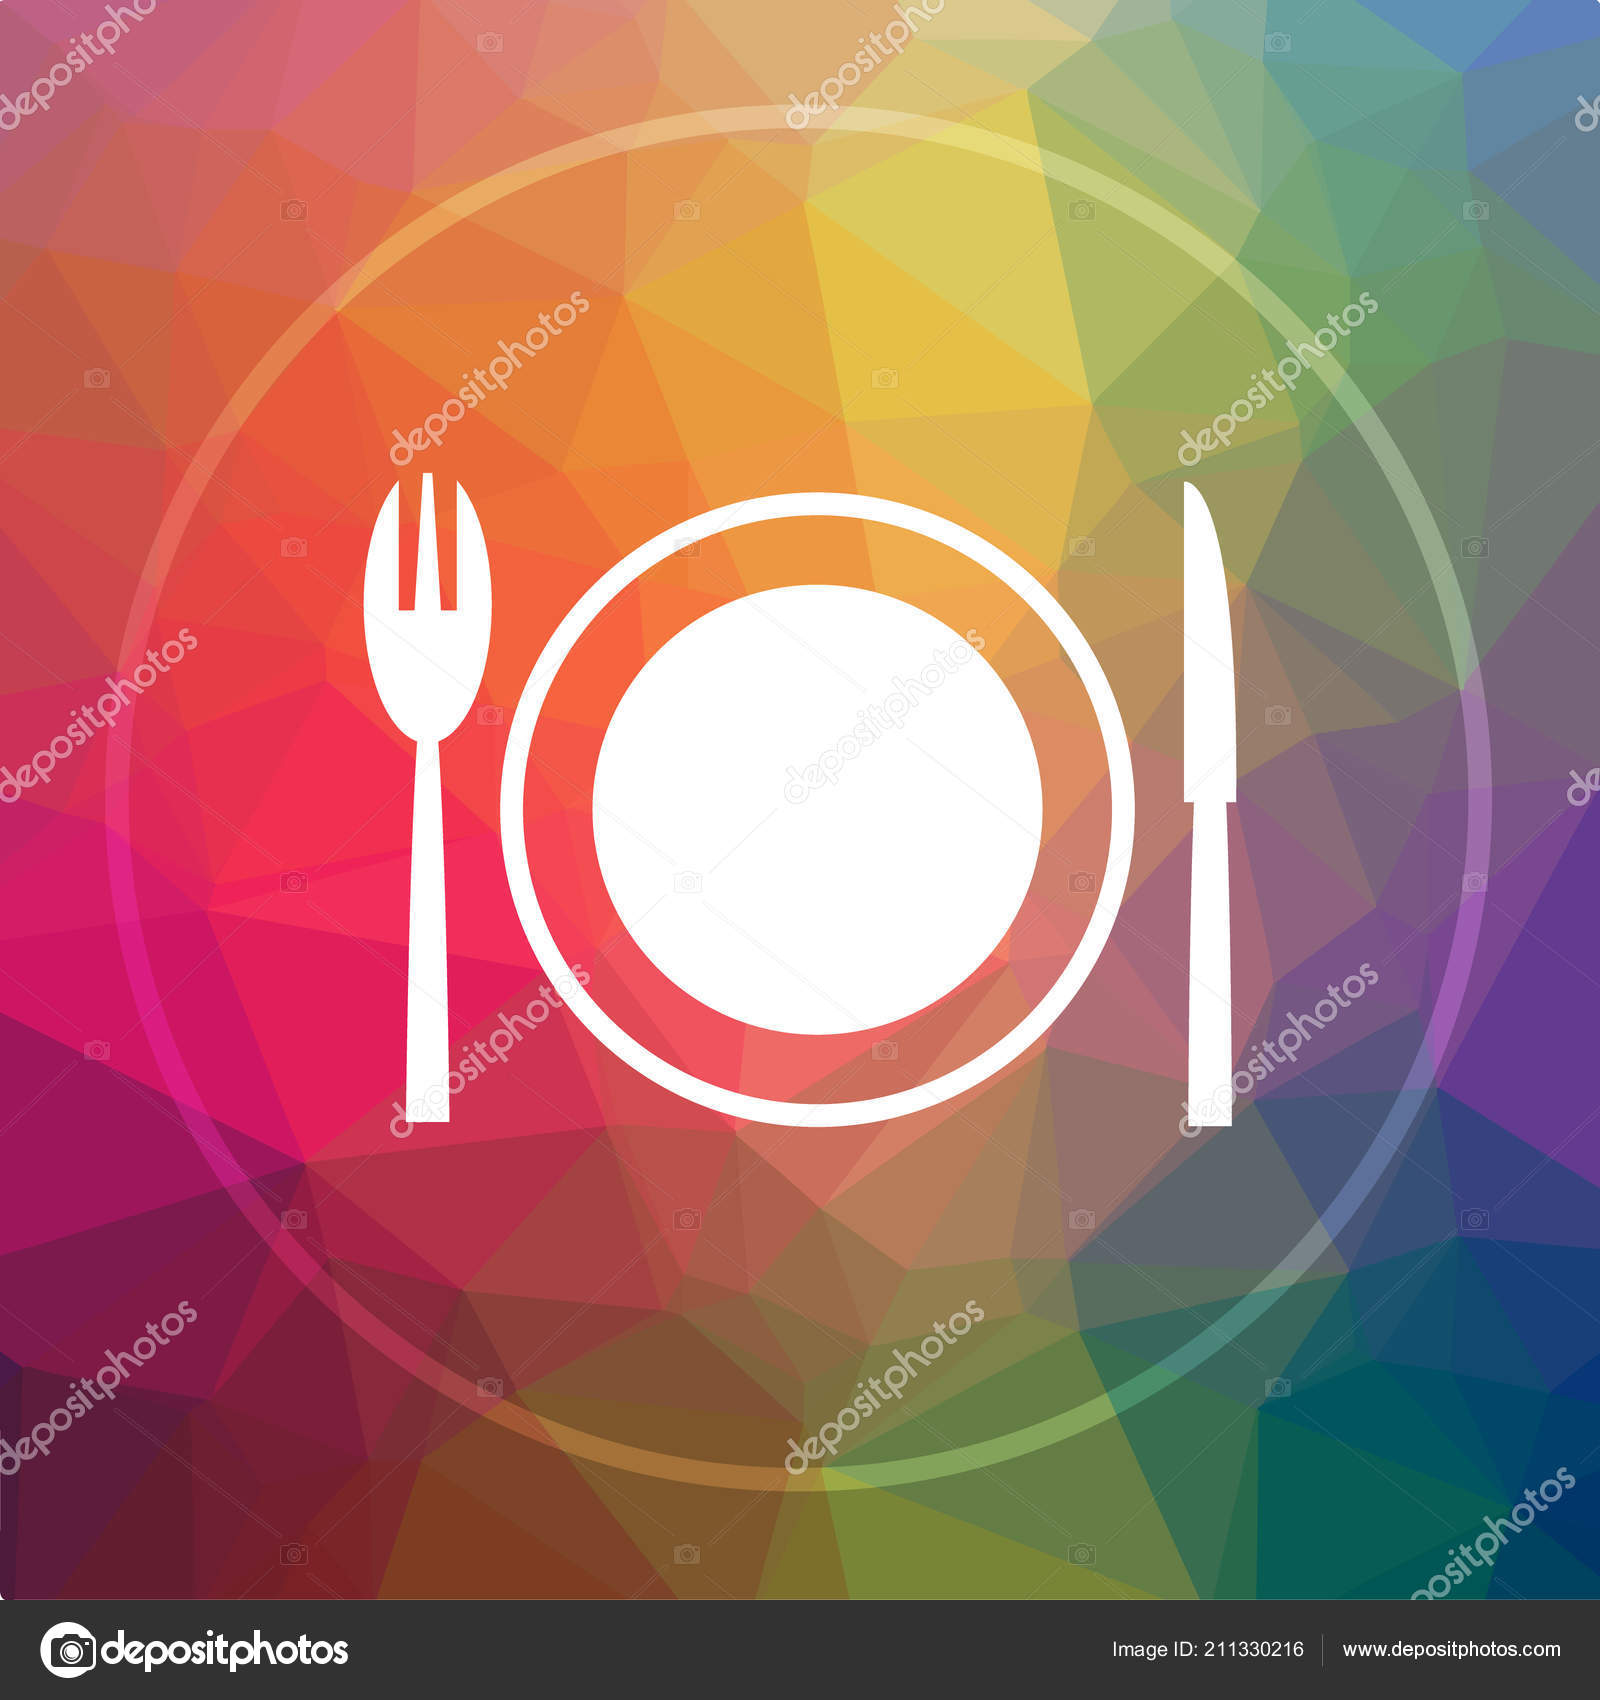 Restaurant Icon Restaurant Website Button Low Poly Background Stock Photo  by ©valentint 211330216